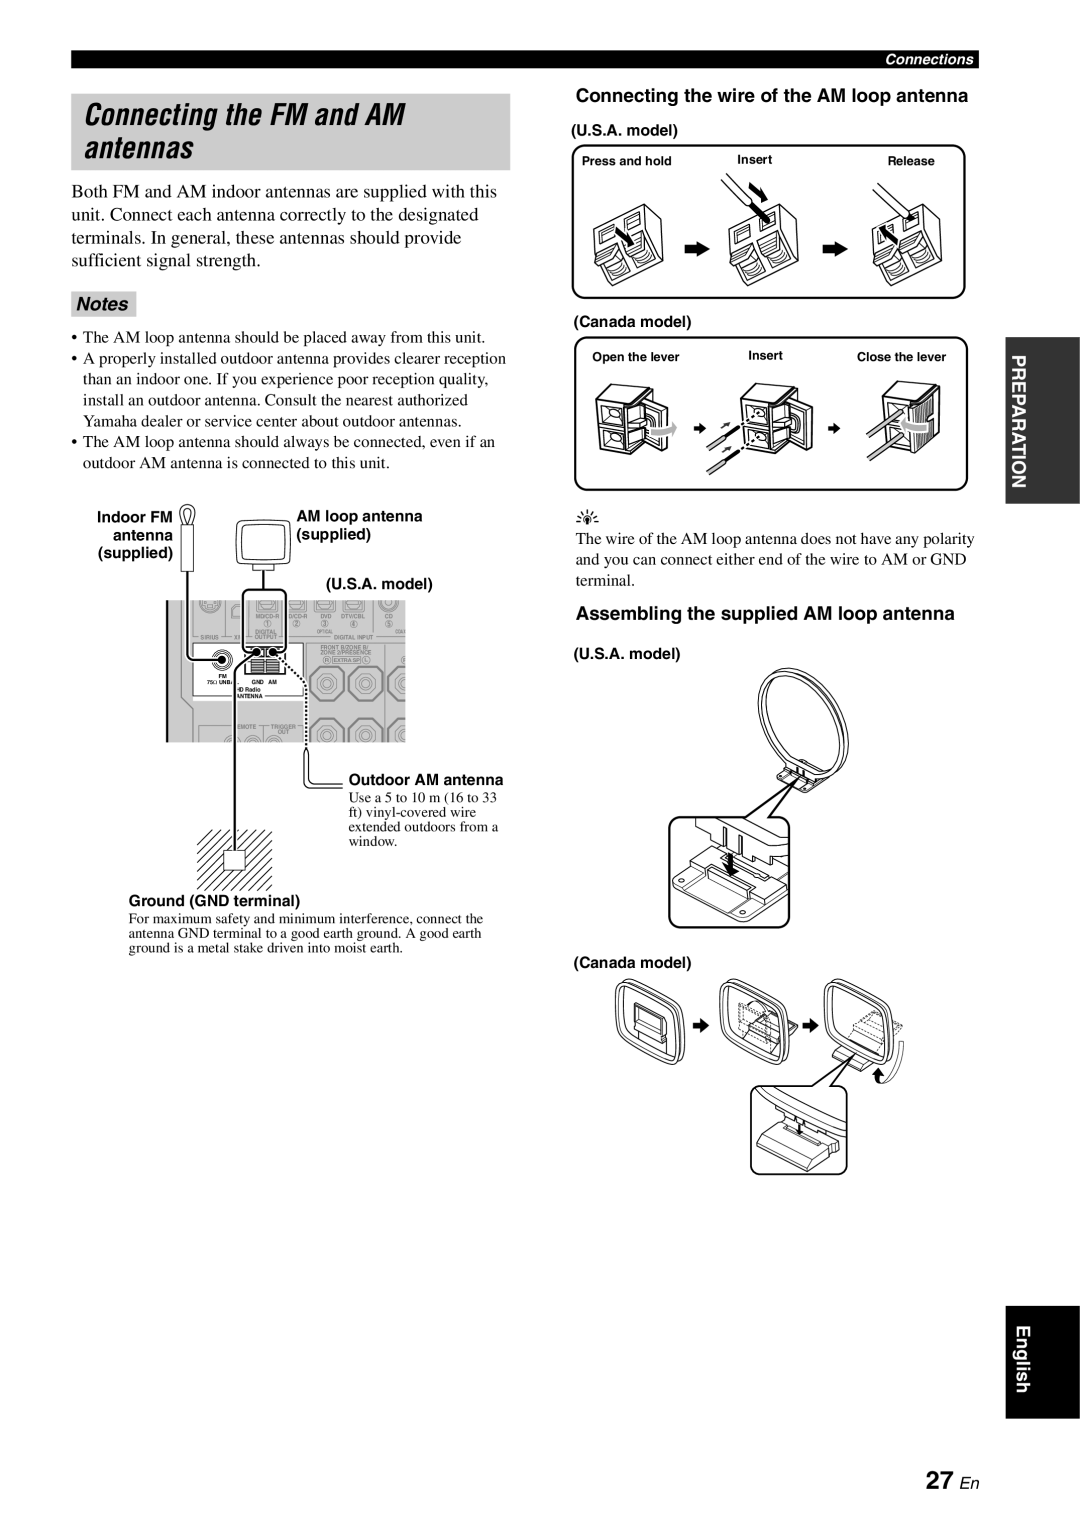 Yamaha RX-V863 owner manual Connecting the FM and AM antennas, 27 En, Notes 